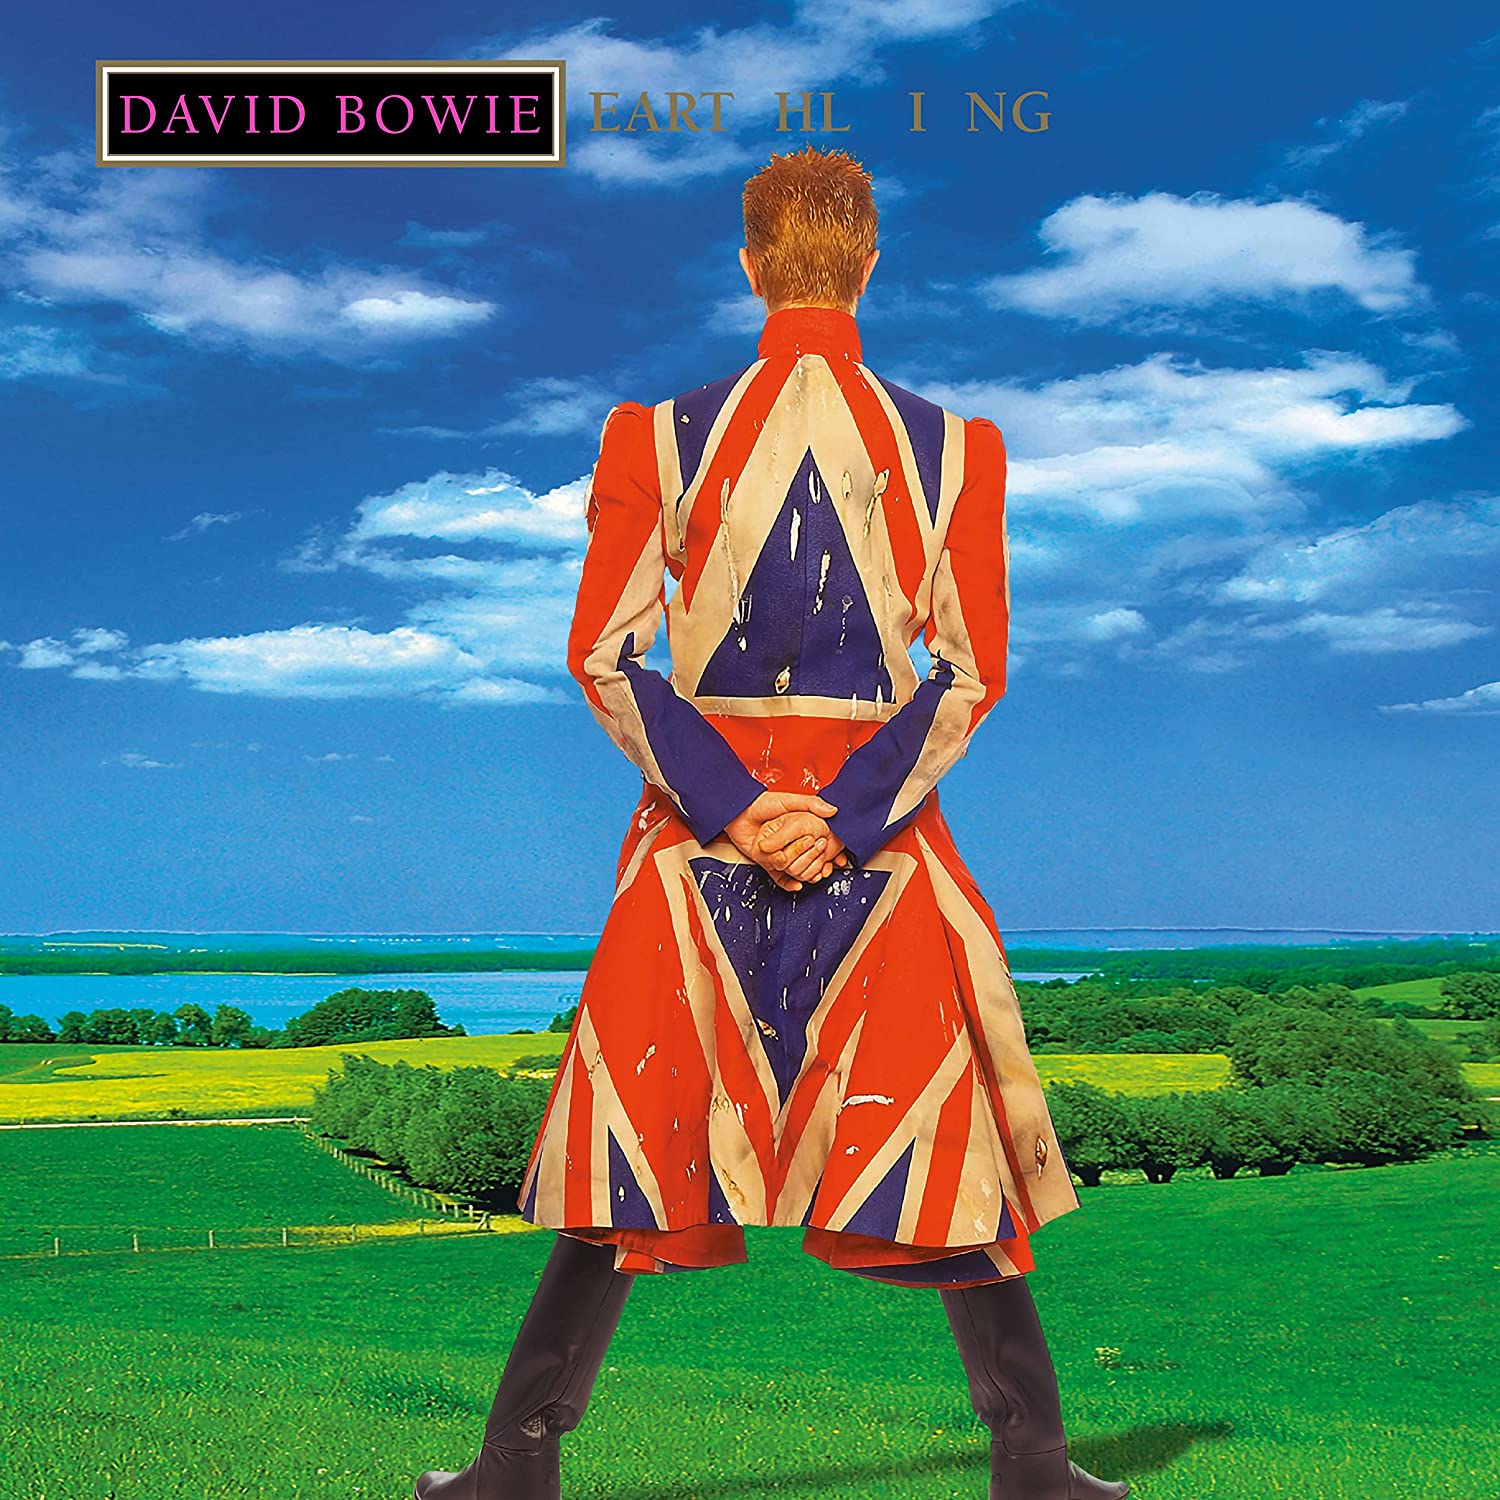 Виниловая Пластинка Bowie, David Earthling (0190295253349) виниловая пластинка bowie david scary monsters and super creeps remastered 0190295842611